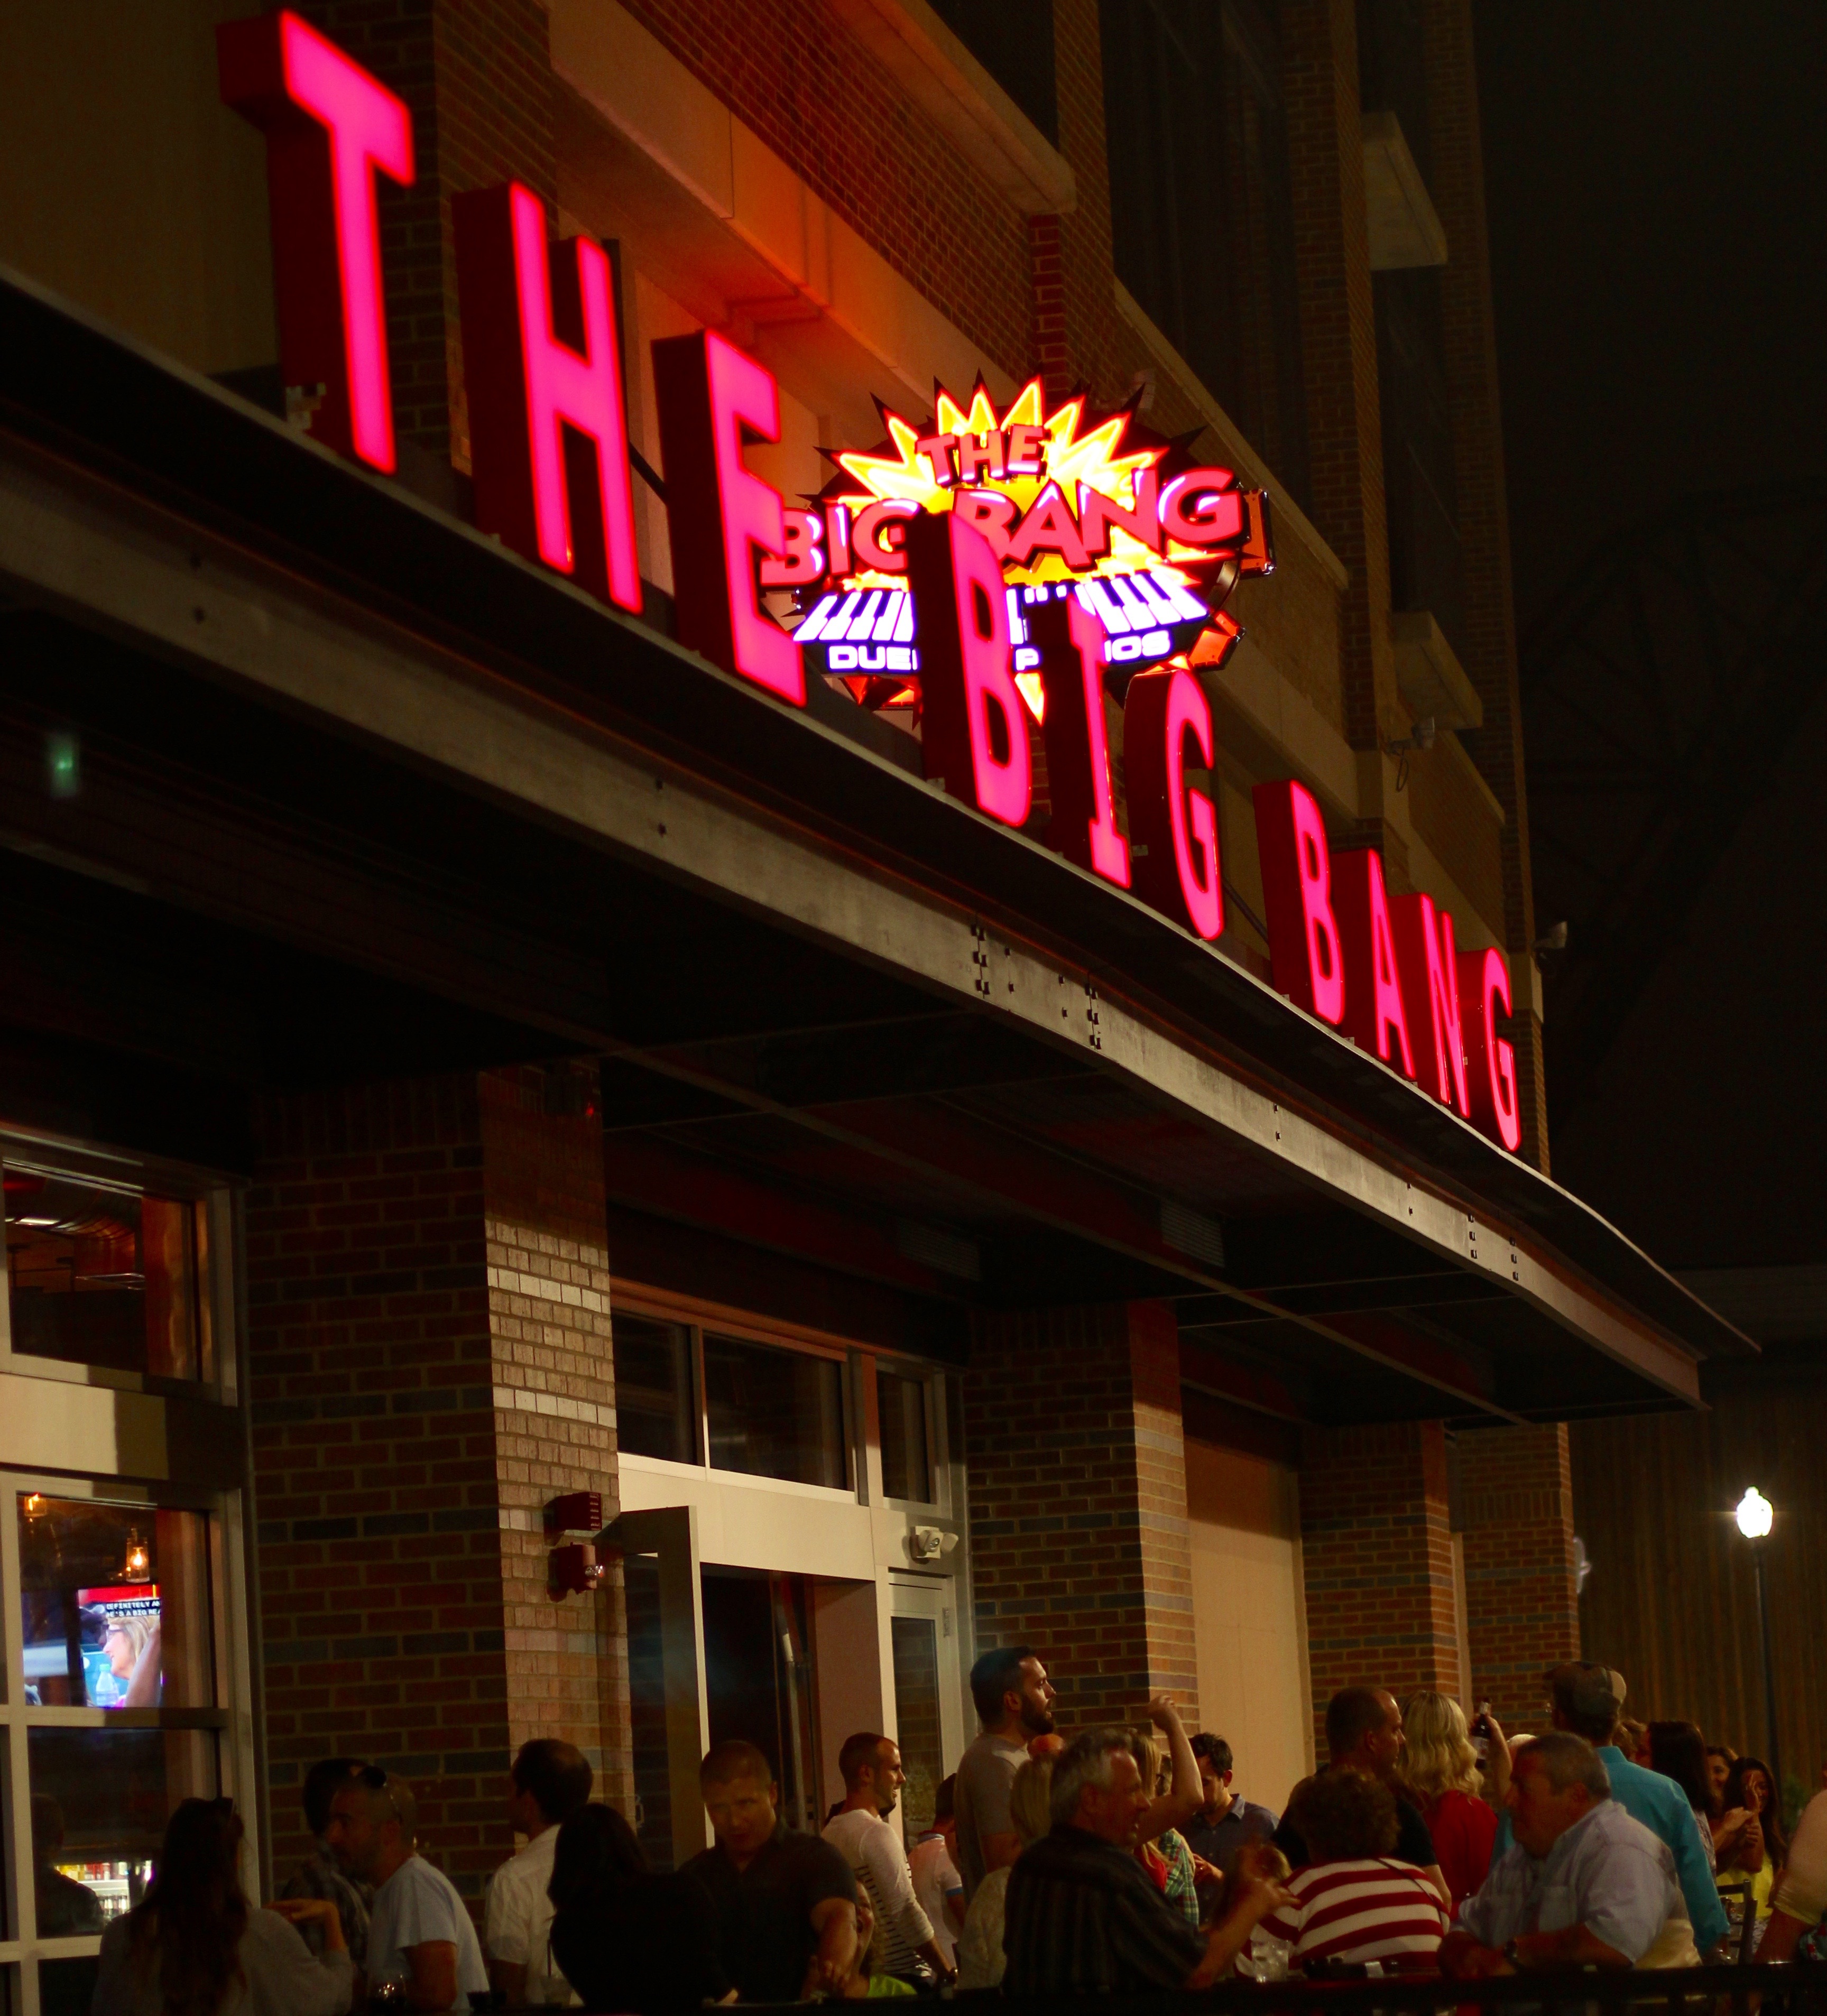 The Big Bang Dueling Piano bar located in the Flats East Bank